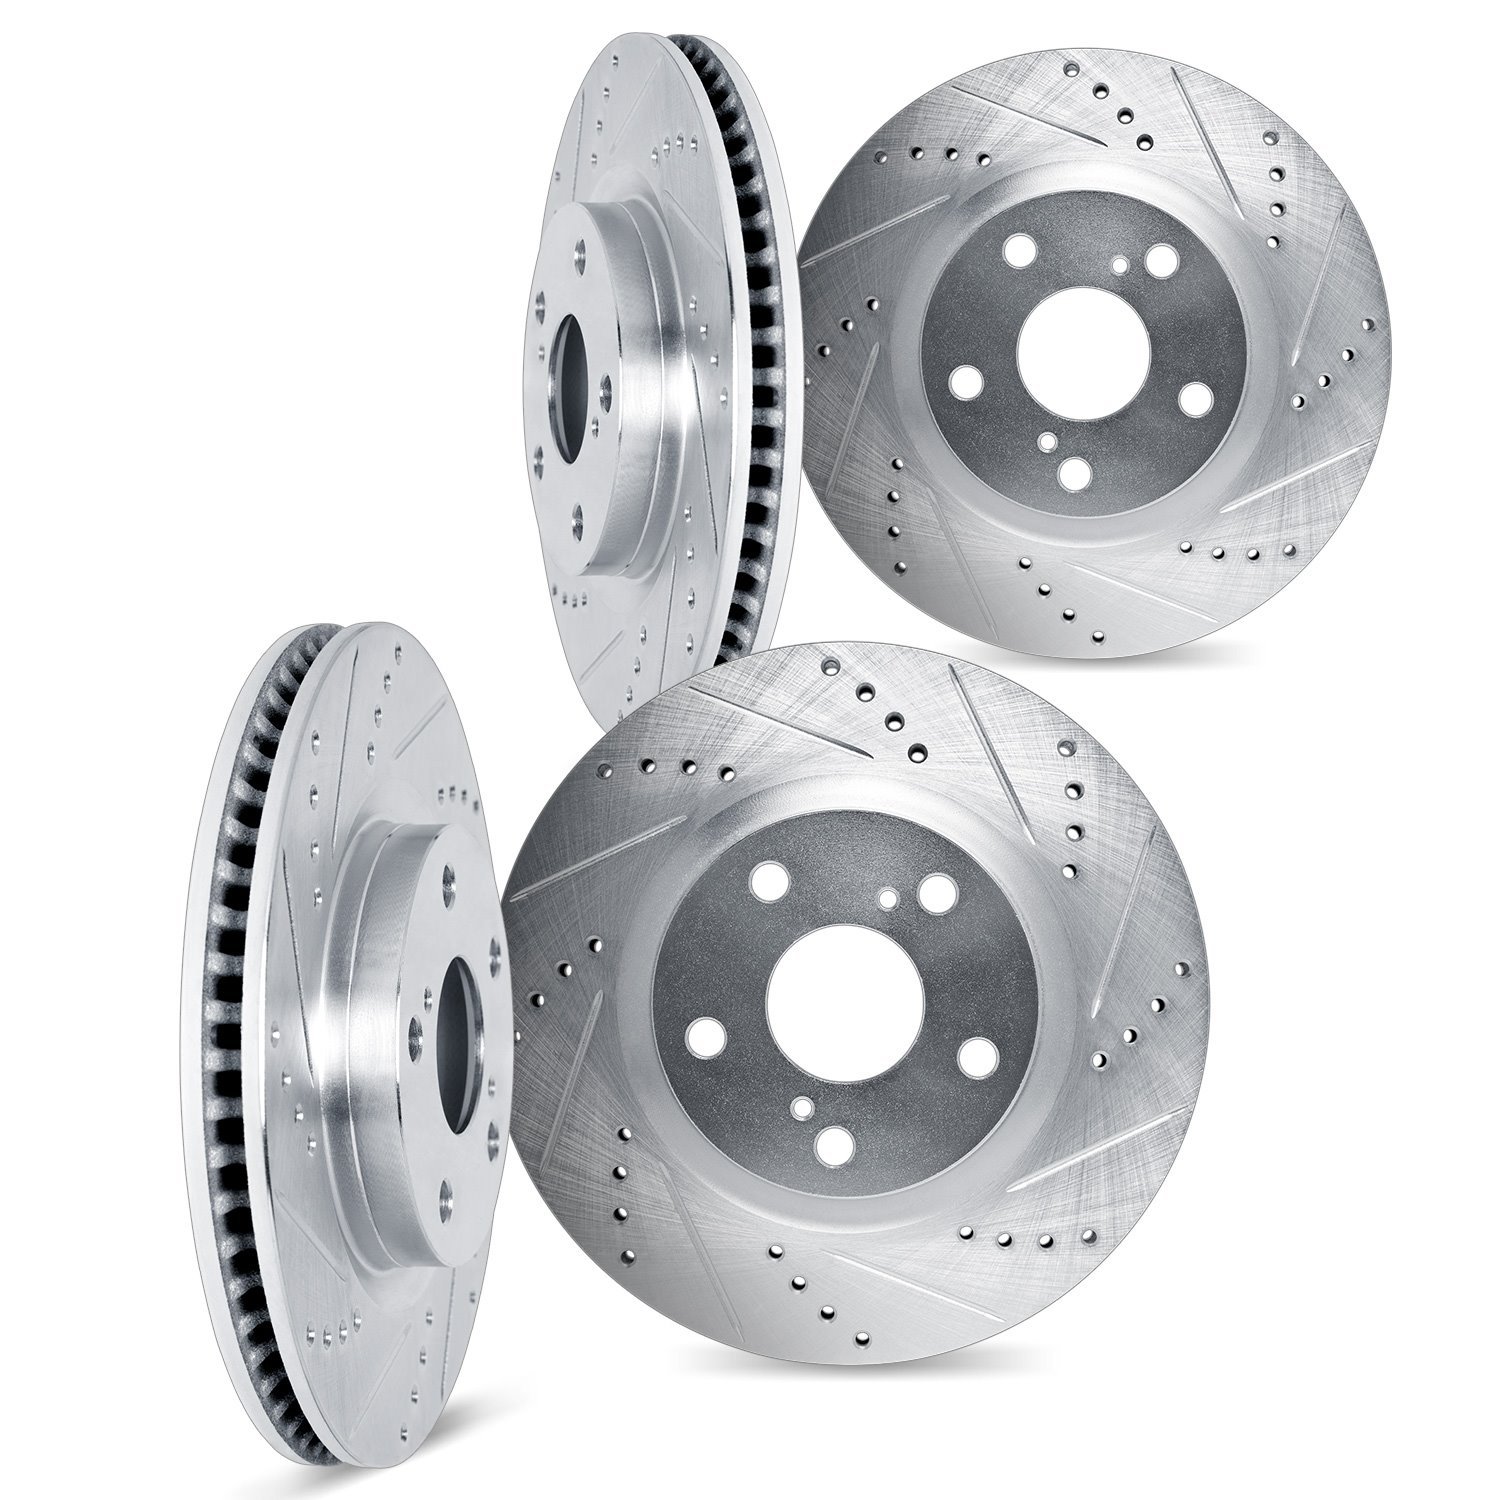 7004-54136 Drilled/Slotted Brake Rotors [Silver], Fits Select Ford/Lincoln/Mercury/Mazda, Position: Front and Rear